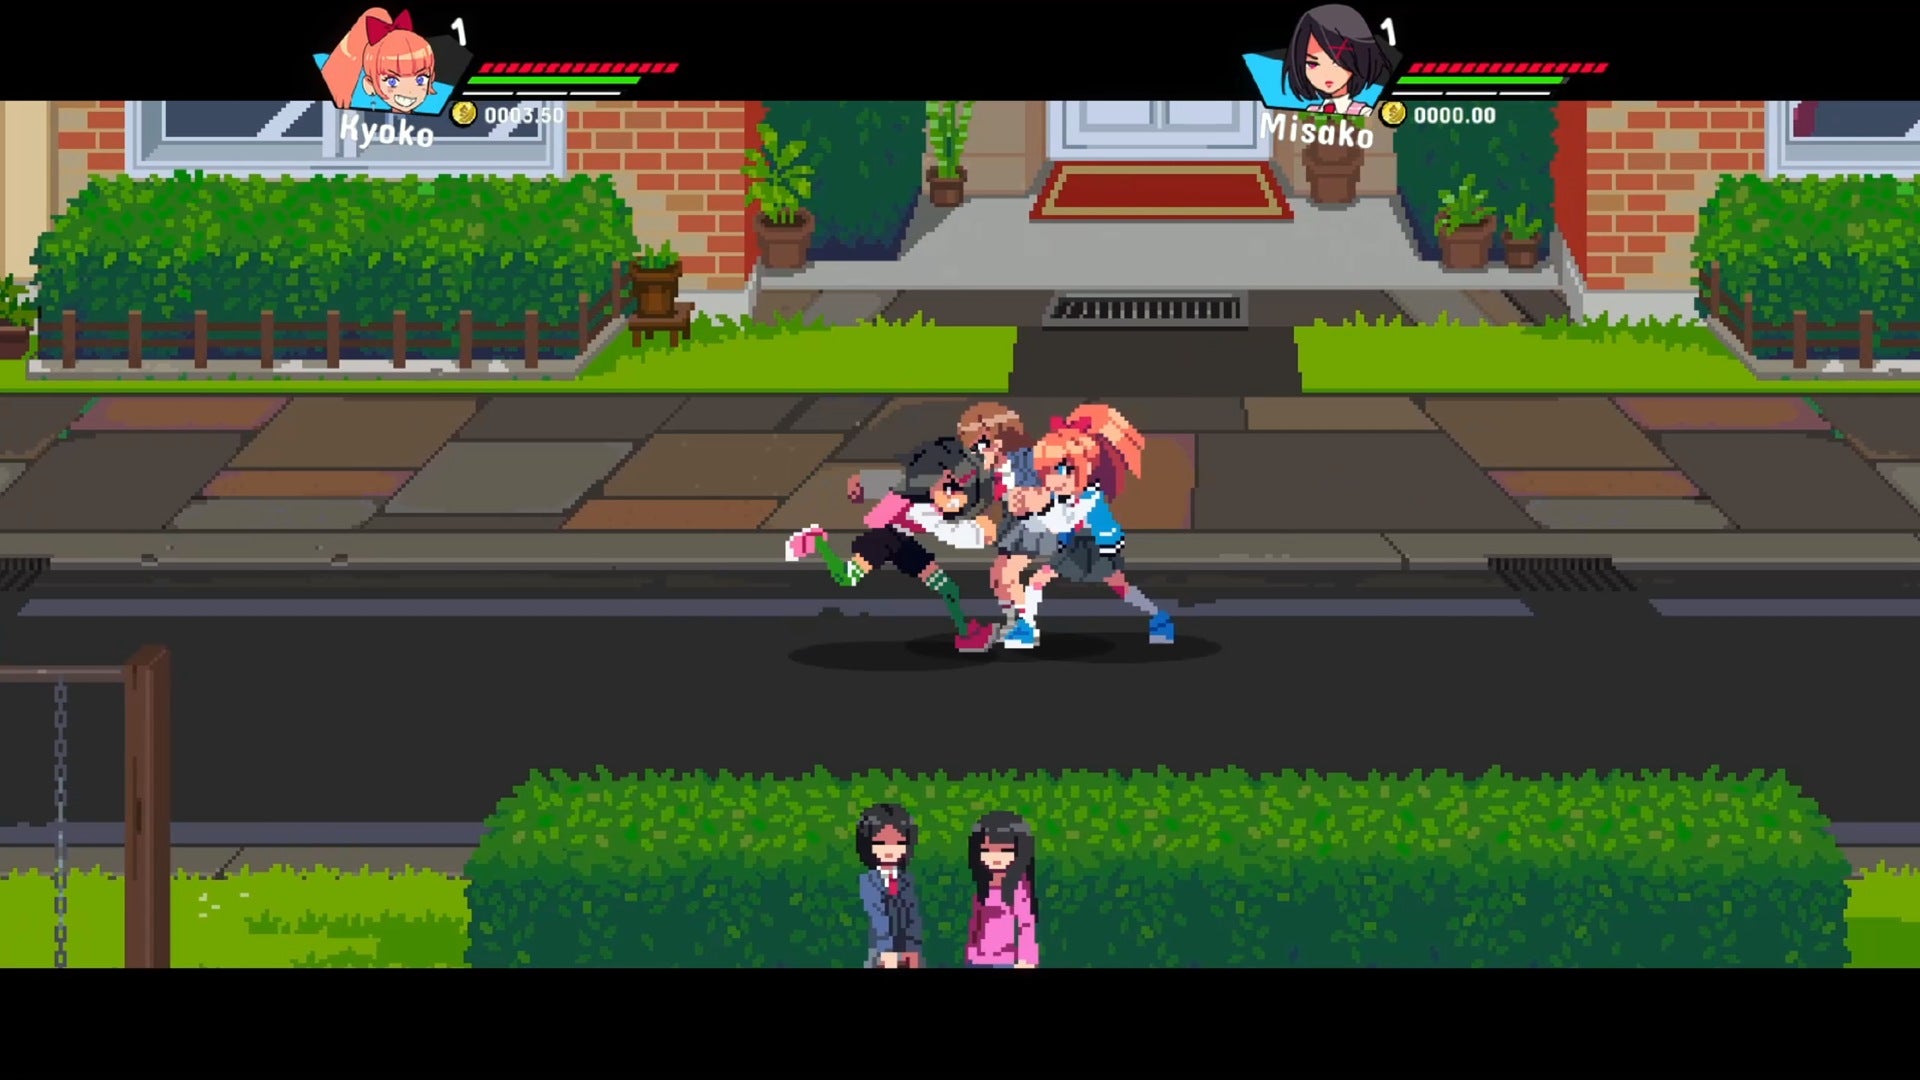 River City Girls Sequel Aims To Perfect That Juicy Fusion Of Anime And Wrestling